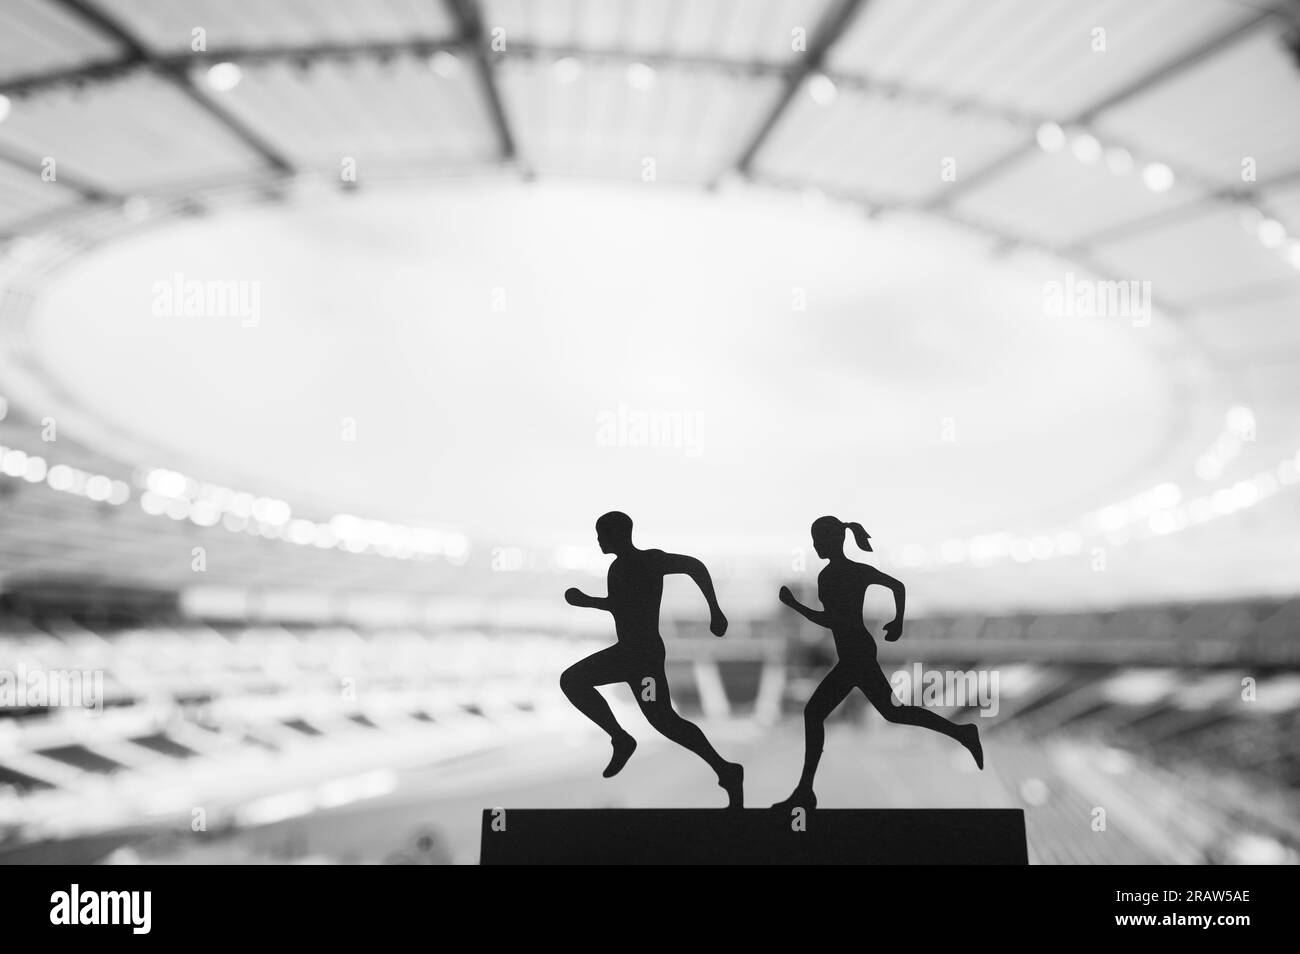 Silhouettes of Male and Female Runners Create a Mesmerizing Display of Teamwork at a Modern Sports Stadium. Shared Passion, Black and White Photo Stock Photo